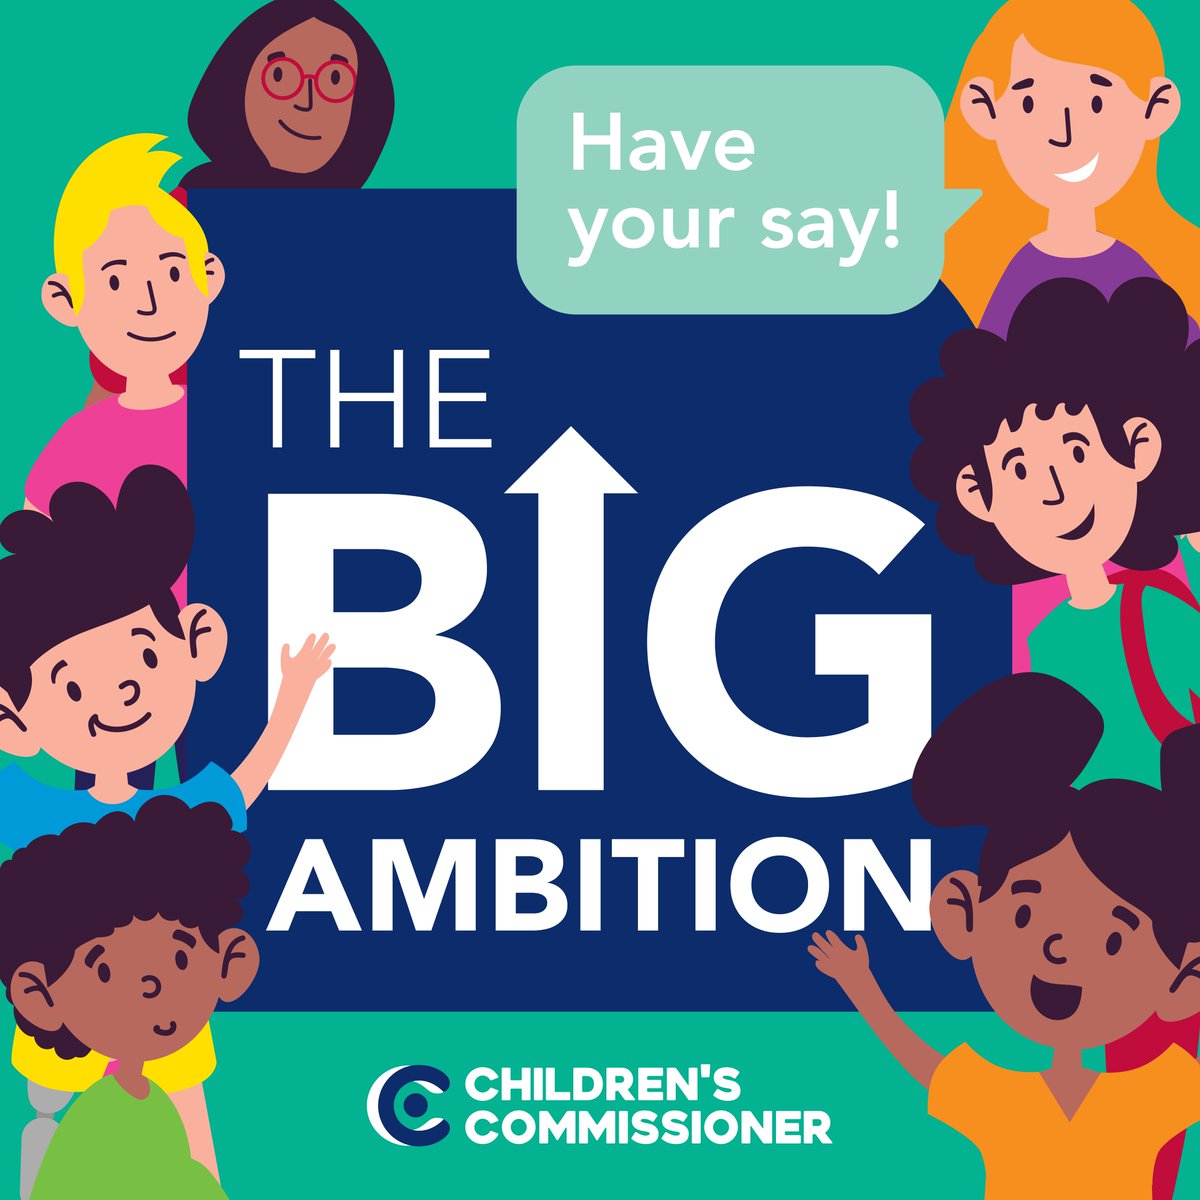 Young carers - get your voice heard The @ChildrensComm is doing a nationwide survey, called #TheBigAmbition, for all young people The results will be shared with key policymakers so it's a great opportunity for young carers needs to heard 👉 bit.ly/46hQKfC